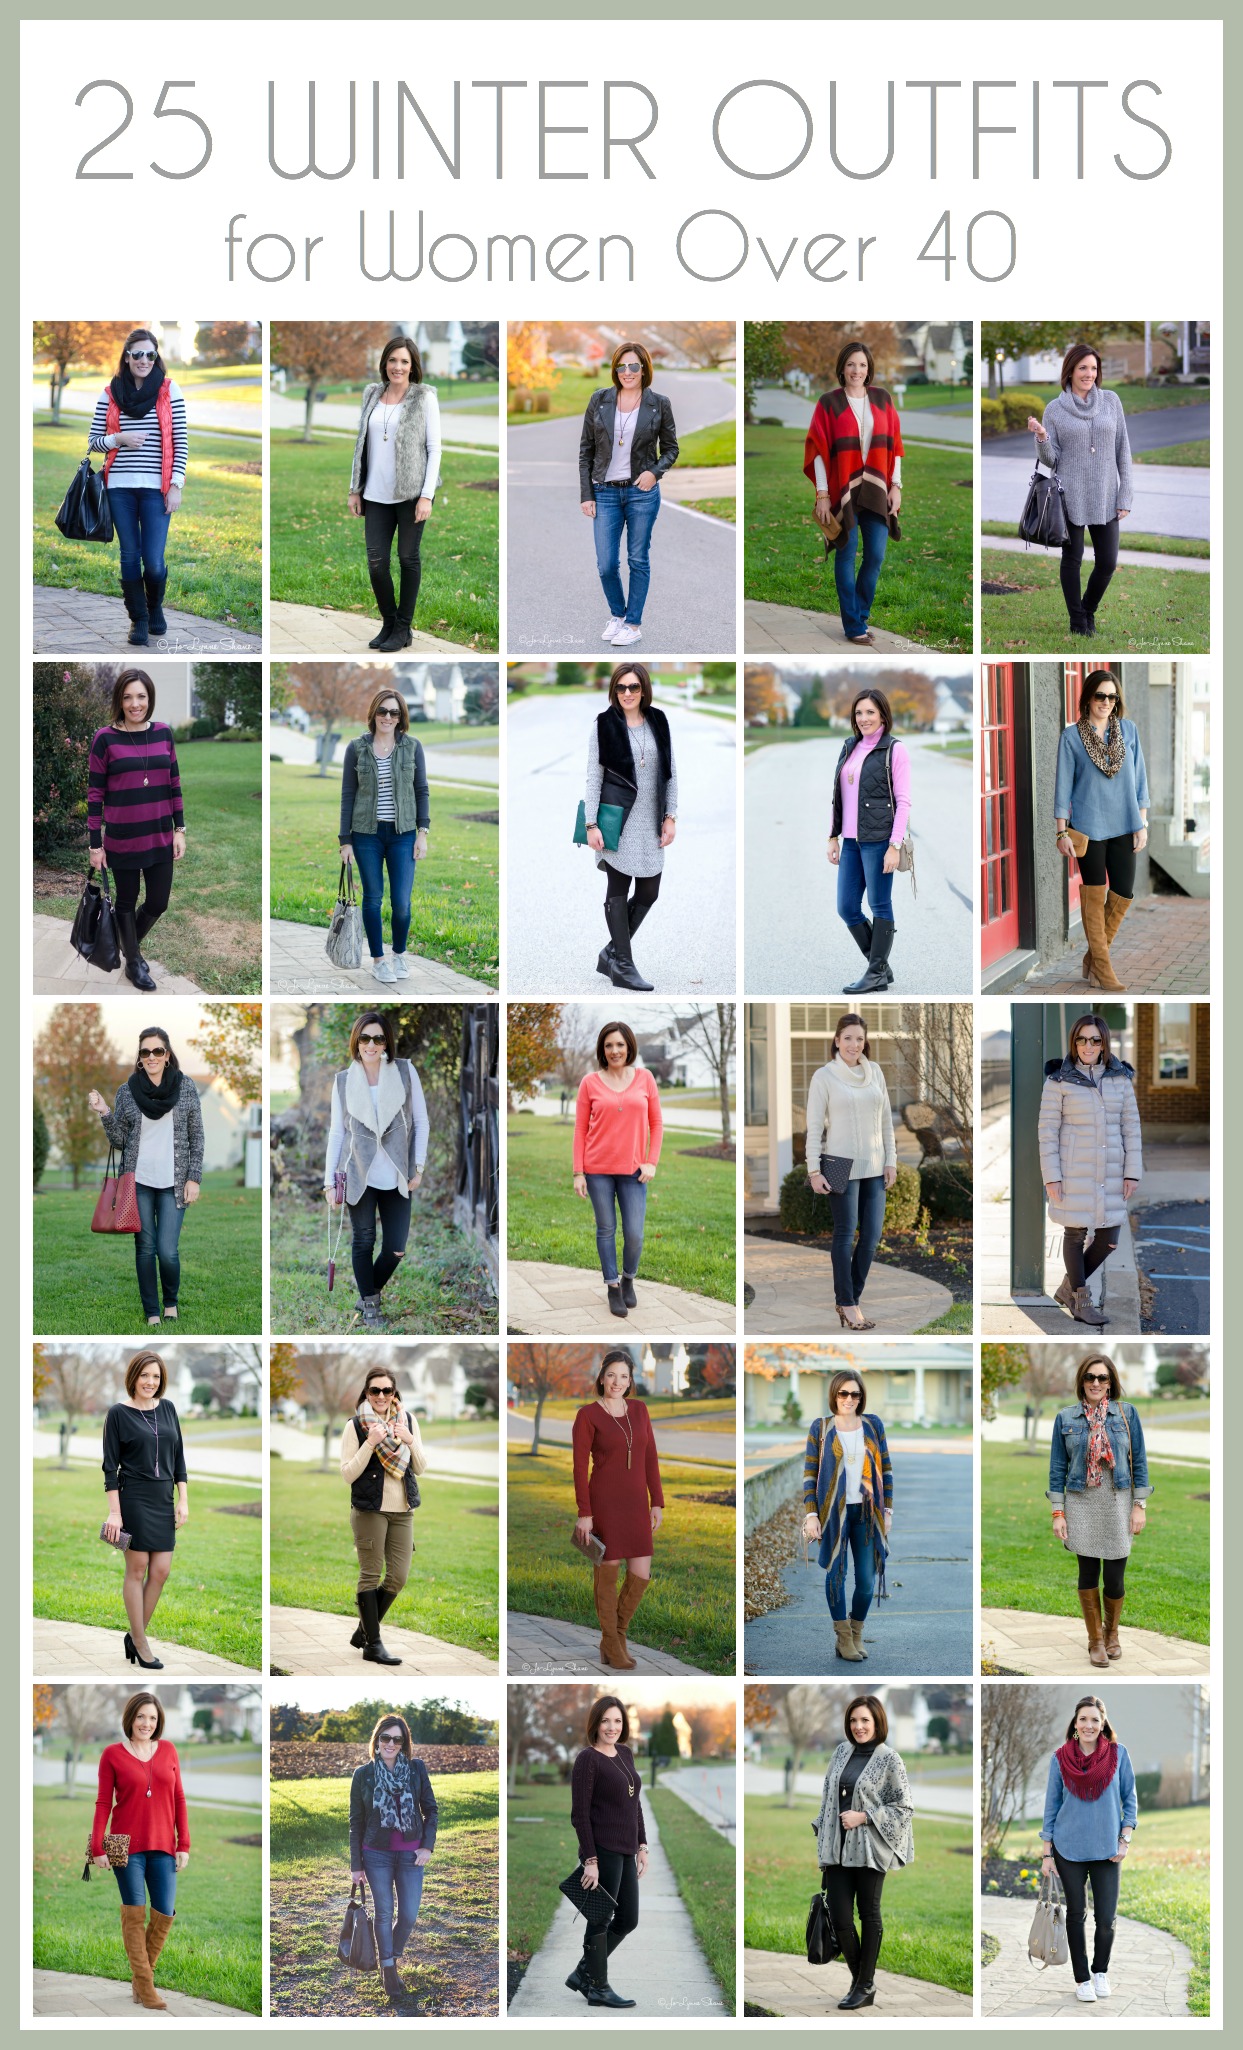 25 winter outfits for women over 40